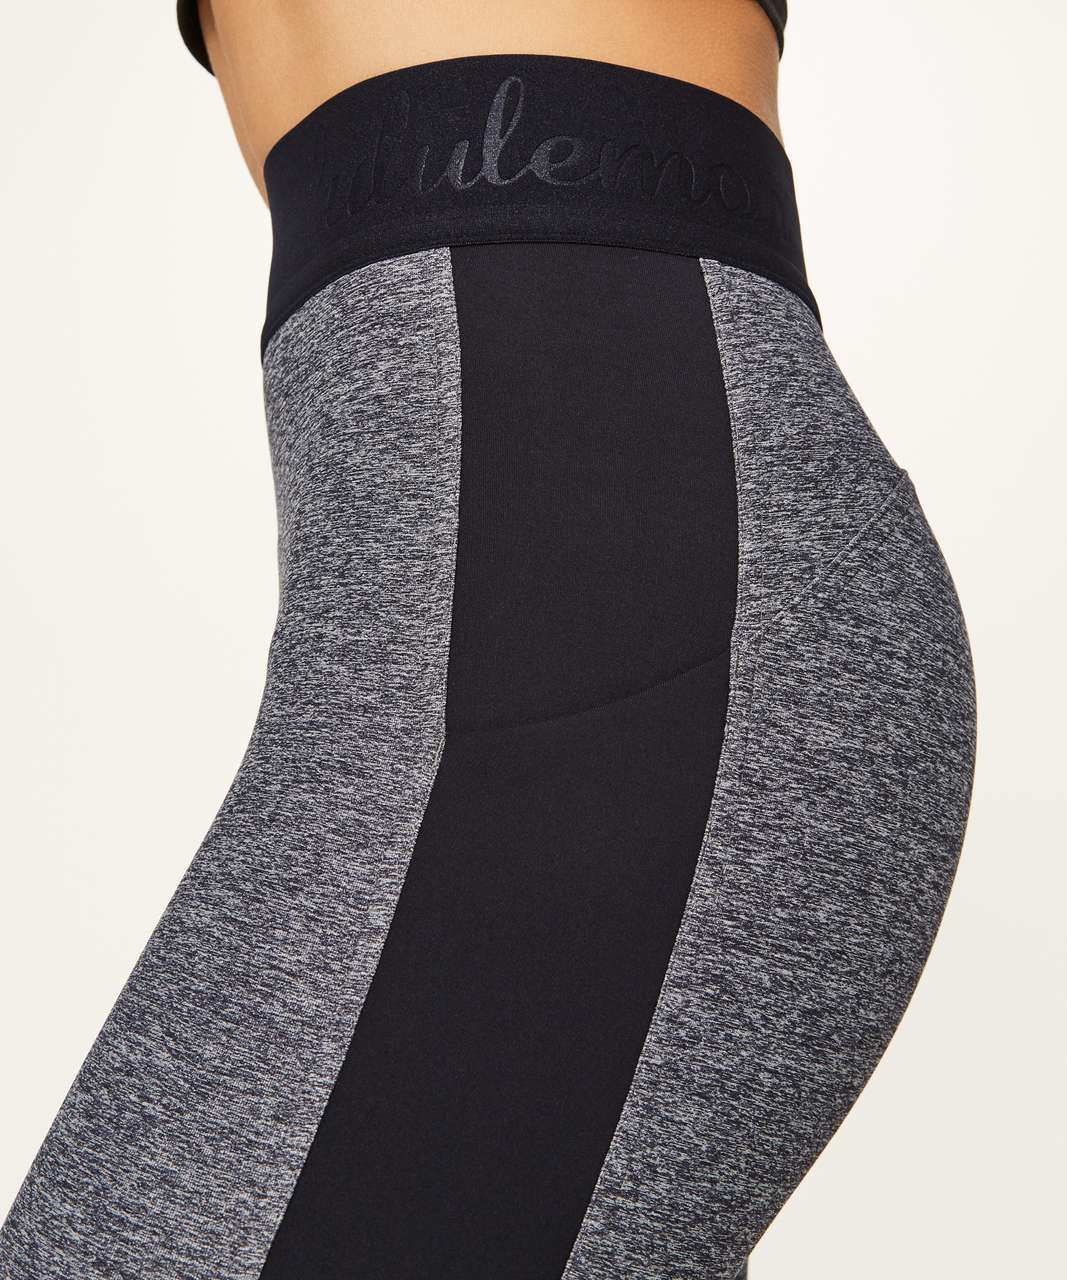 Lululemon Box It Out Tight - Heathered Black / Black (First Release)